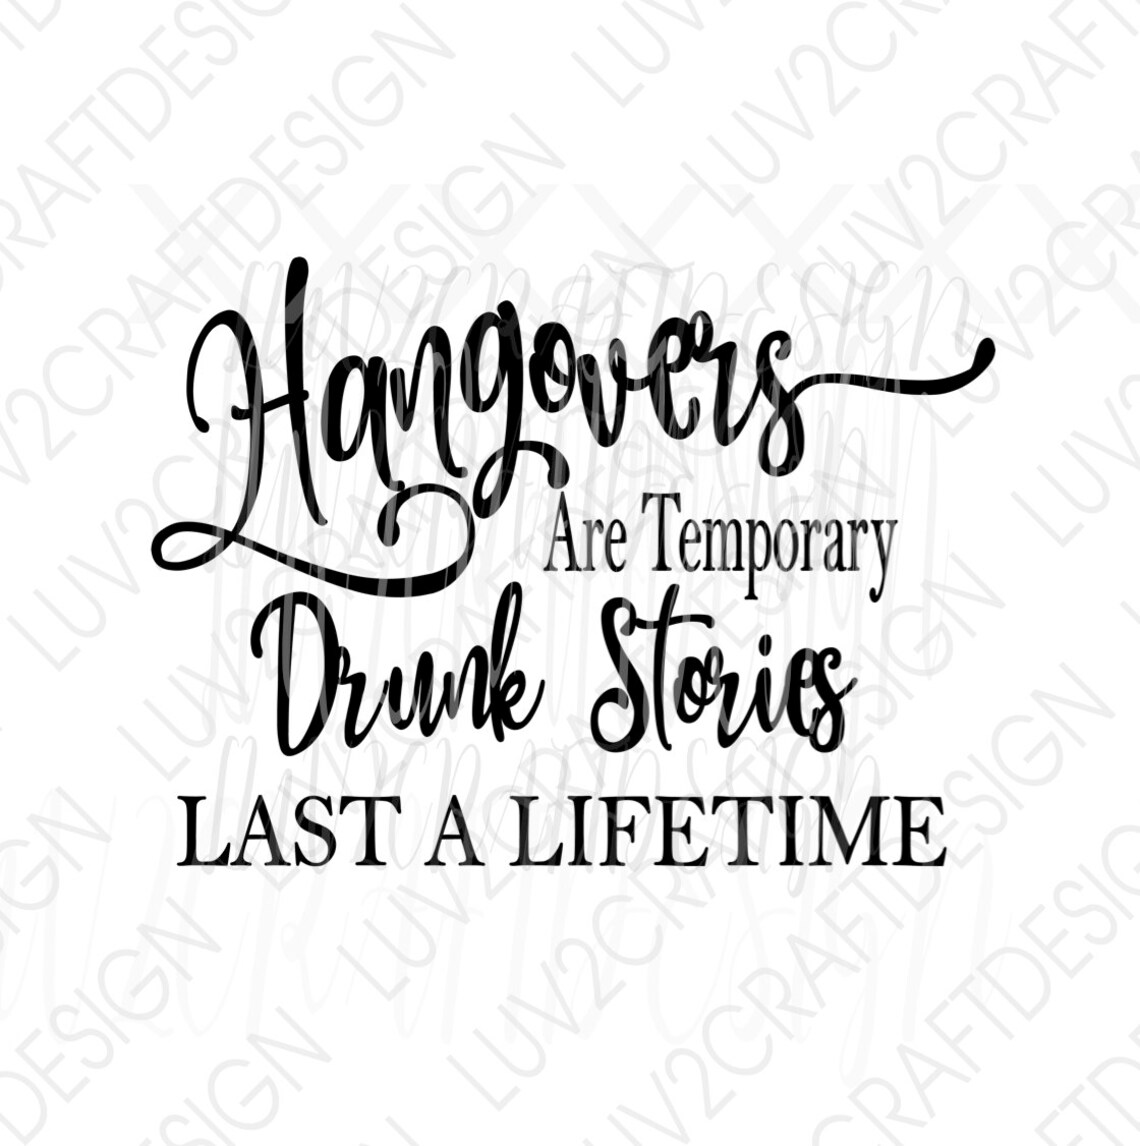 SVG/PNG/JPG Hangovers Are Temporary Drunk Stories Last a - Etsy